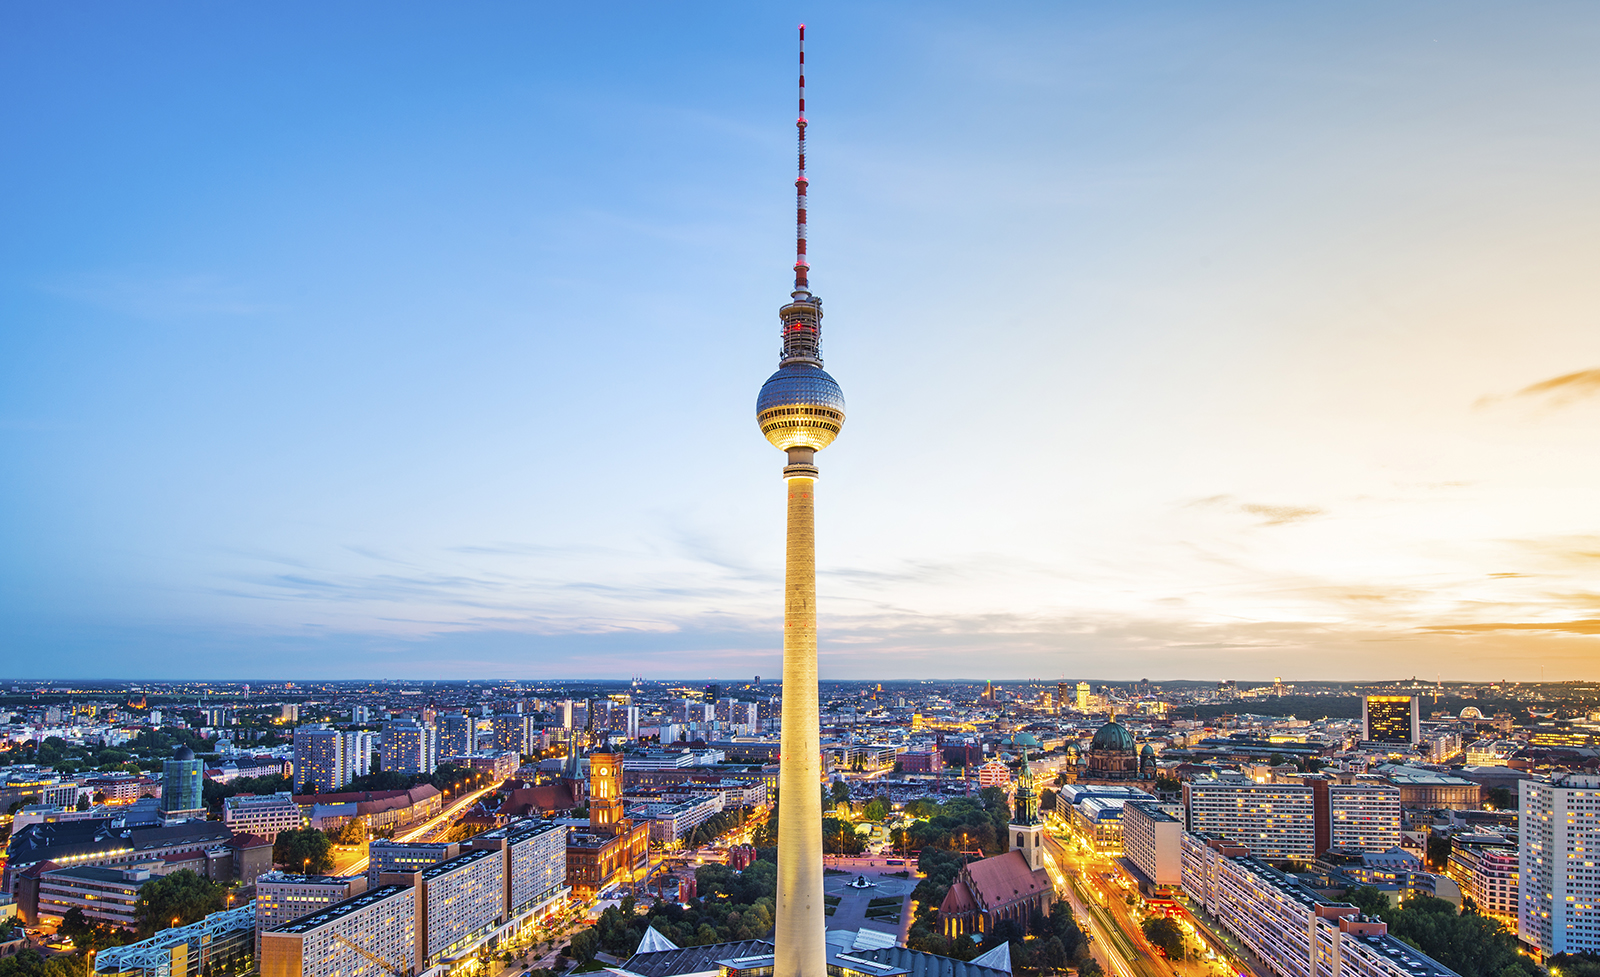 Details About Berlin City Urban Photo Wallpaper Picture Wall Mural